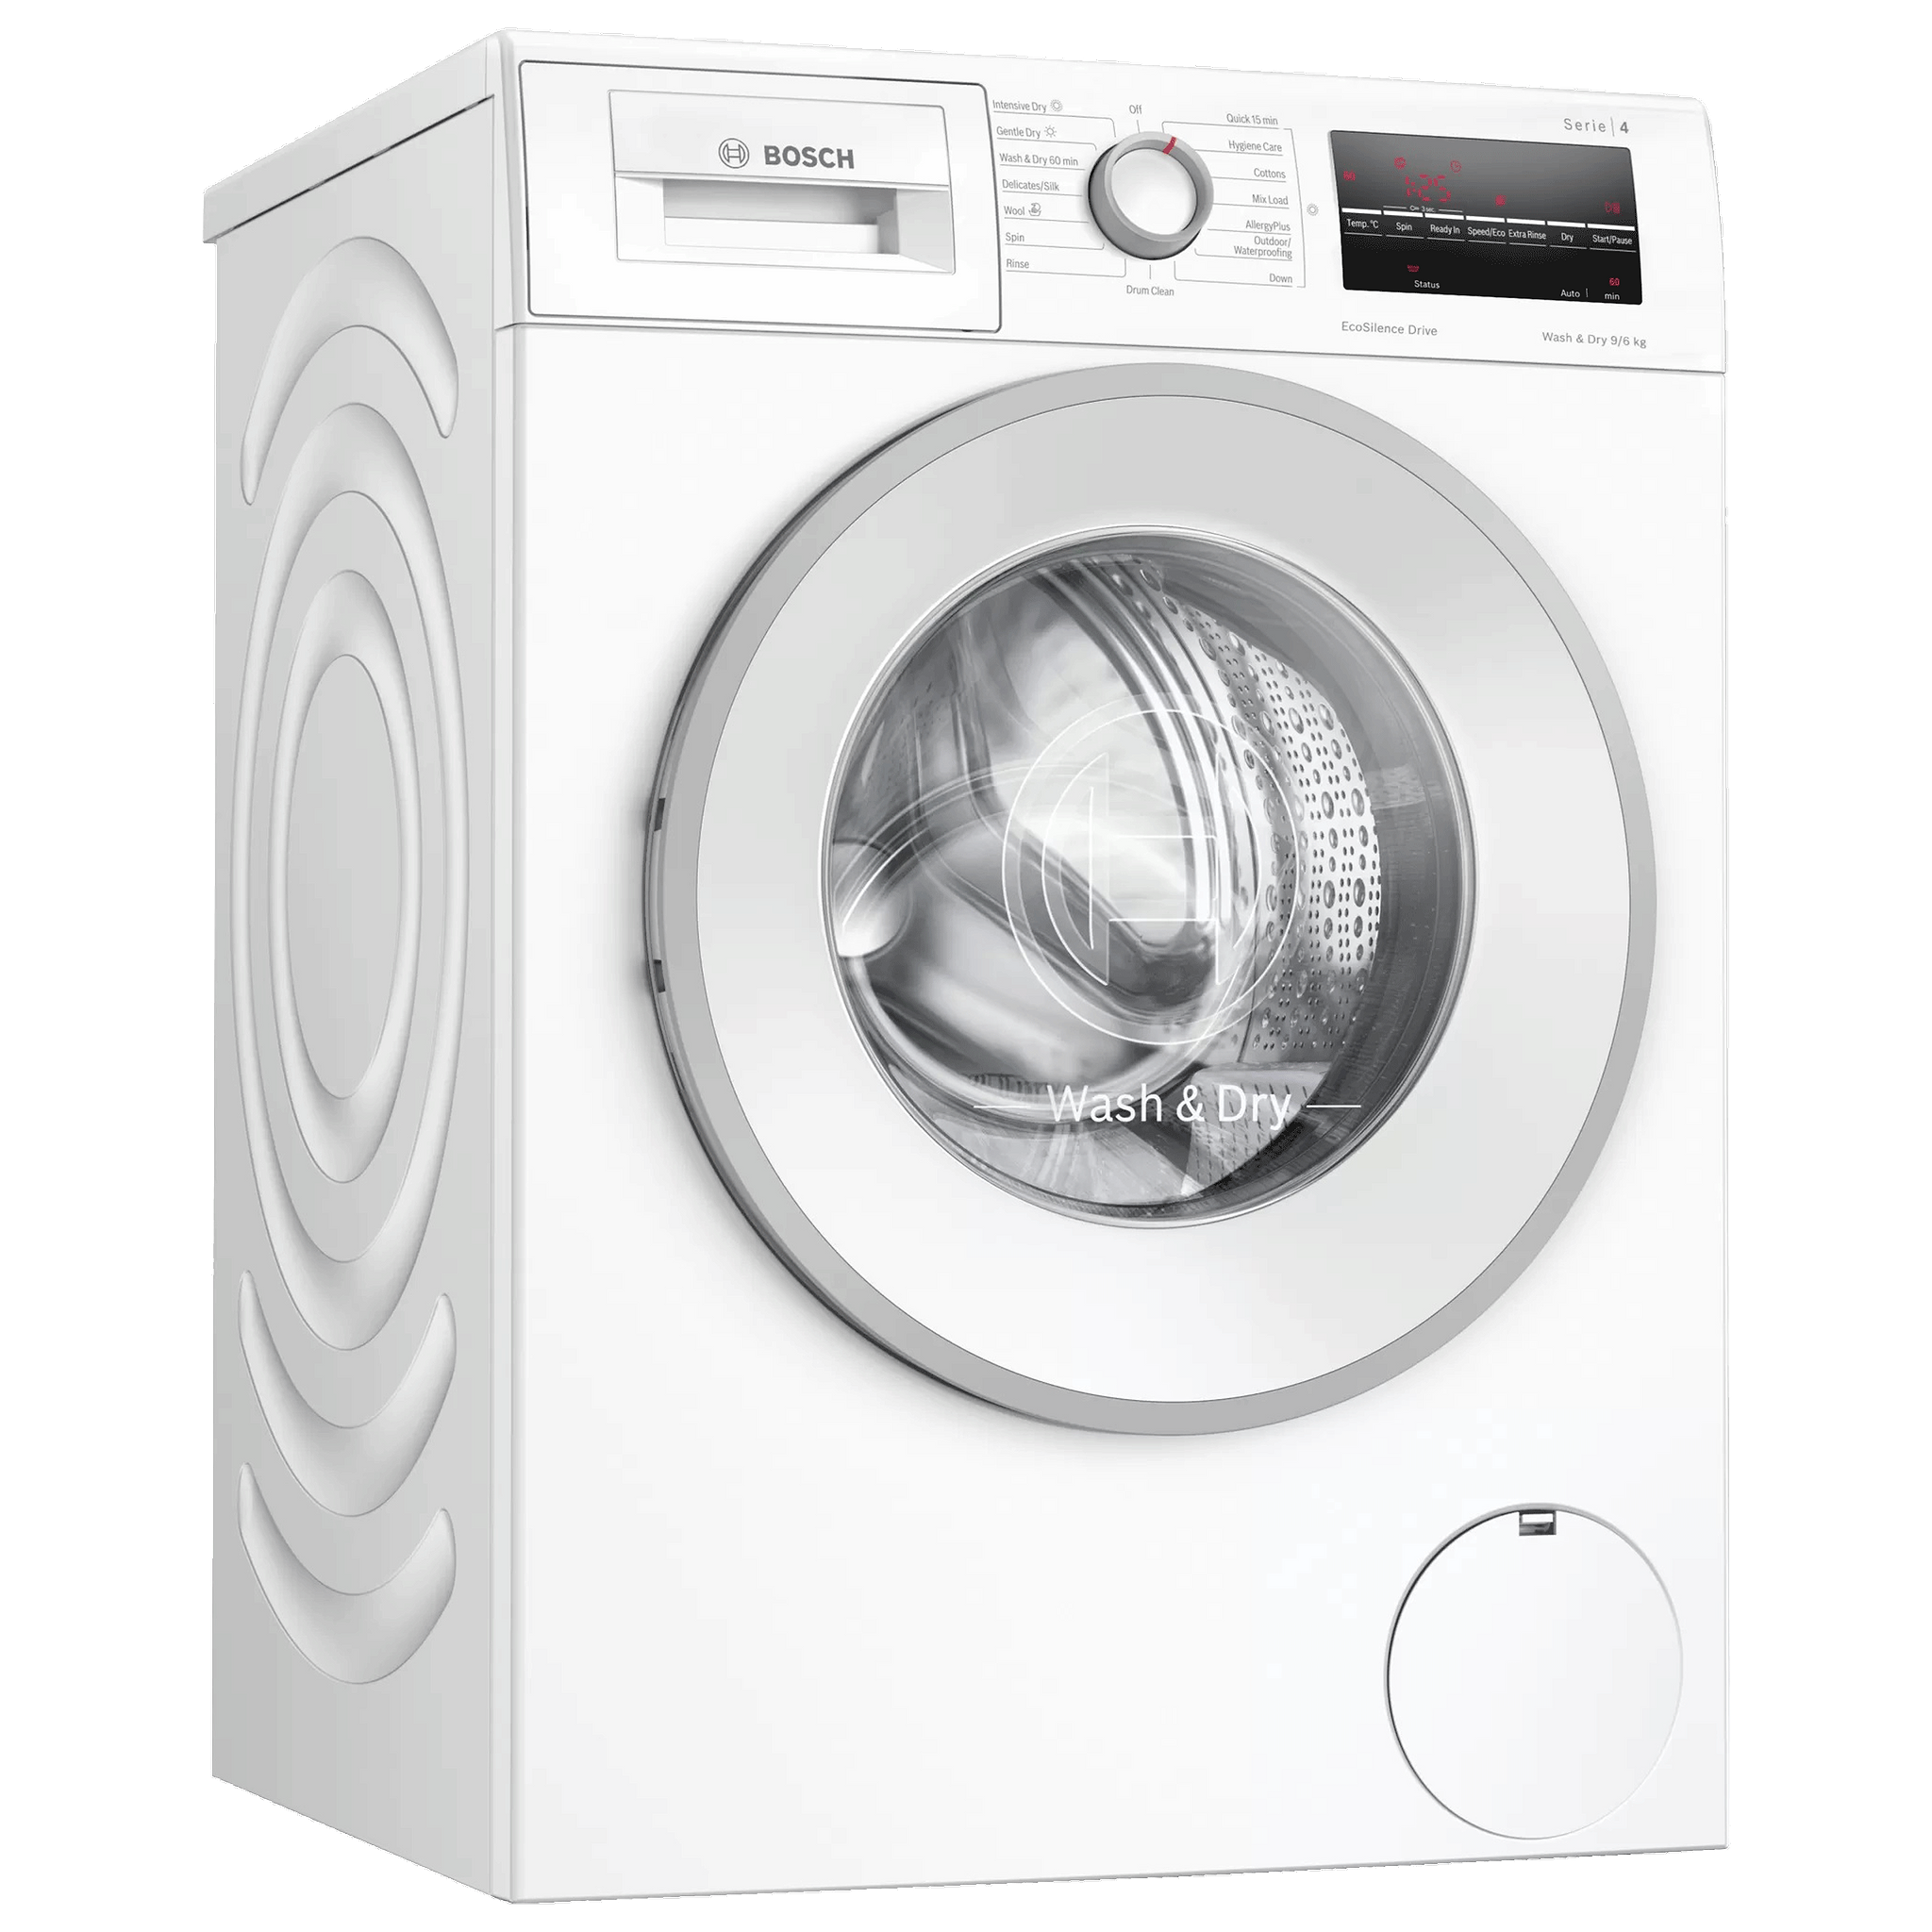 BOSCH Serie 6 9 kg/6 kg 5 Star Fully Automatic Front Load Washer Dryer Combo (VarioInverter, WNA14400IN, White)_1